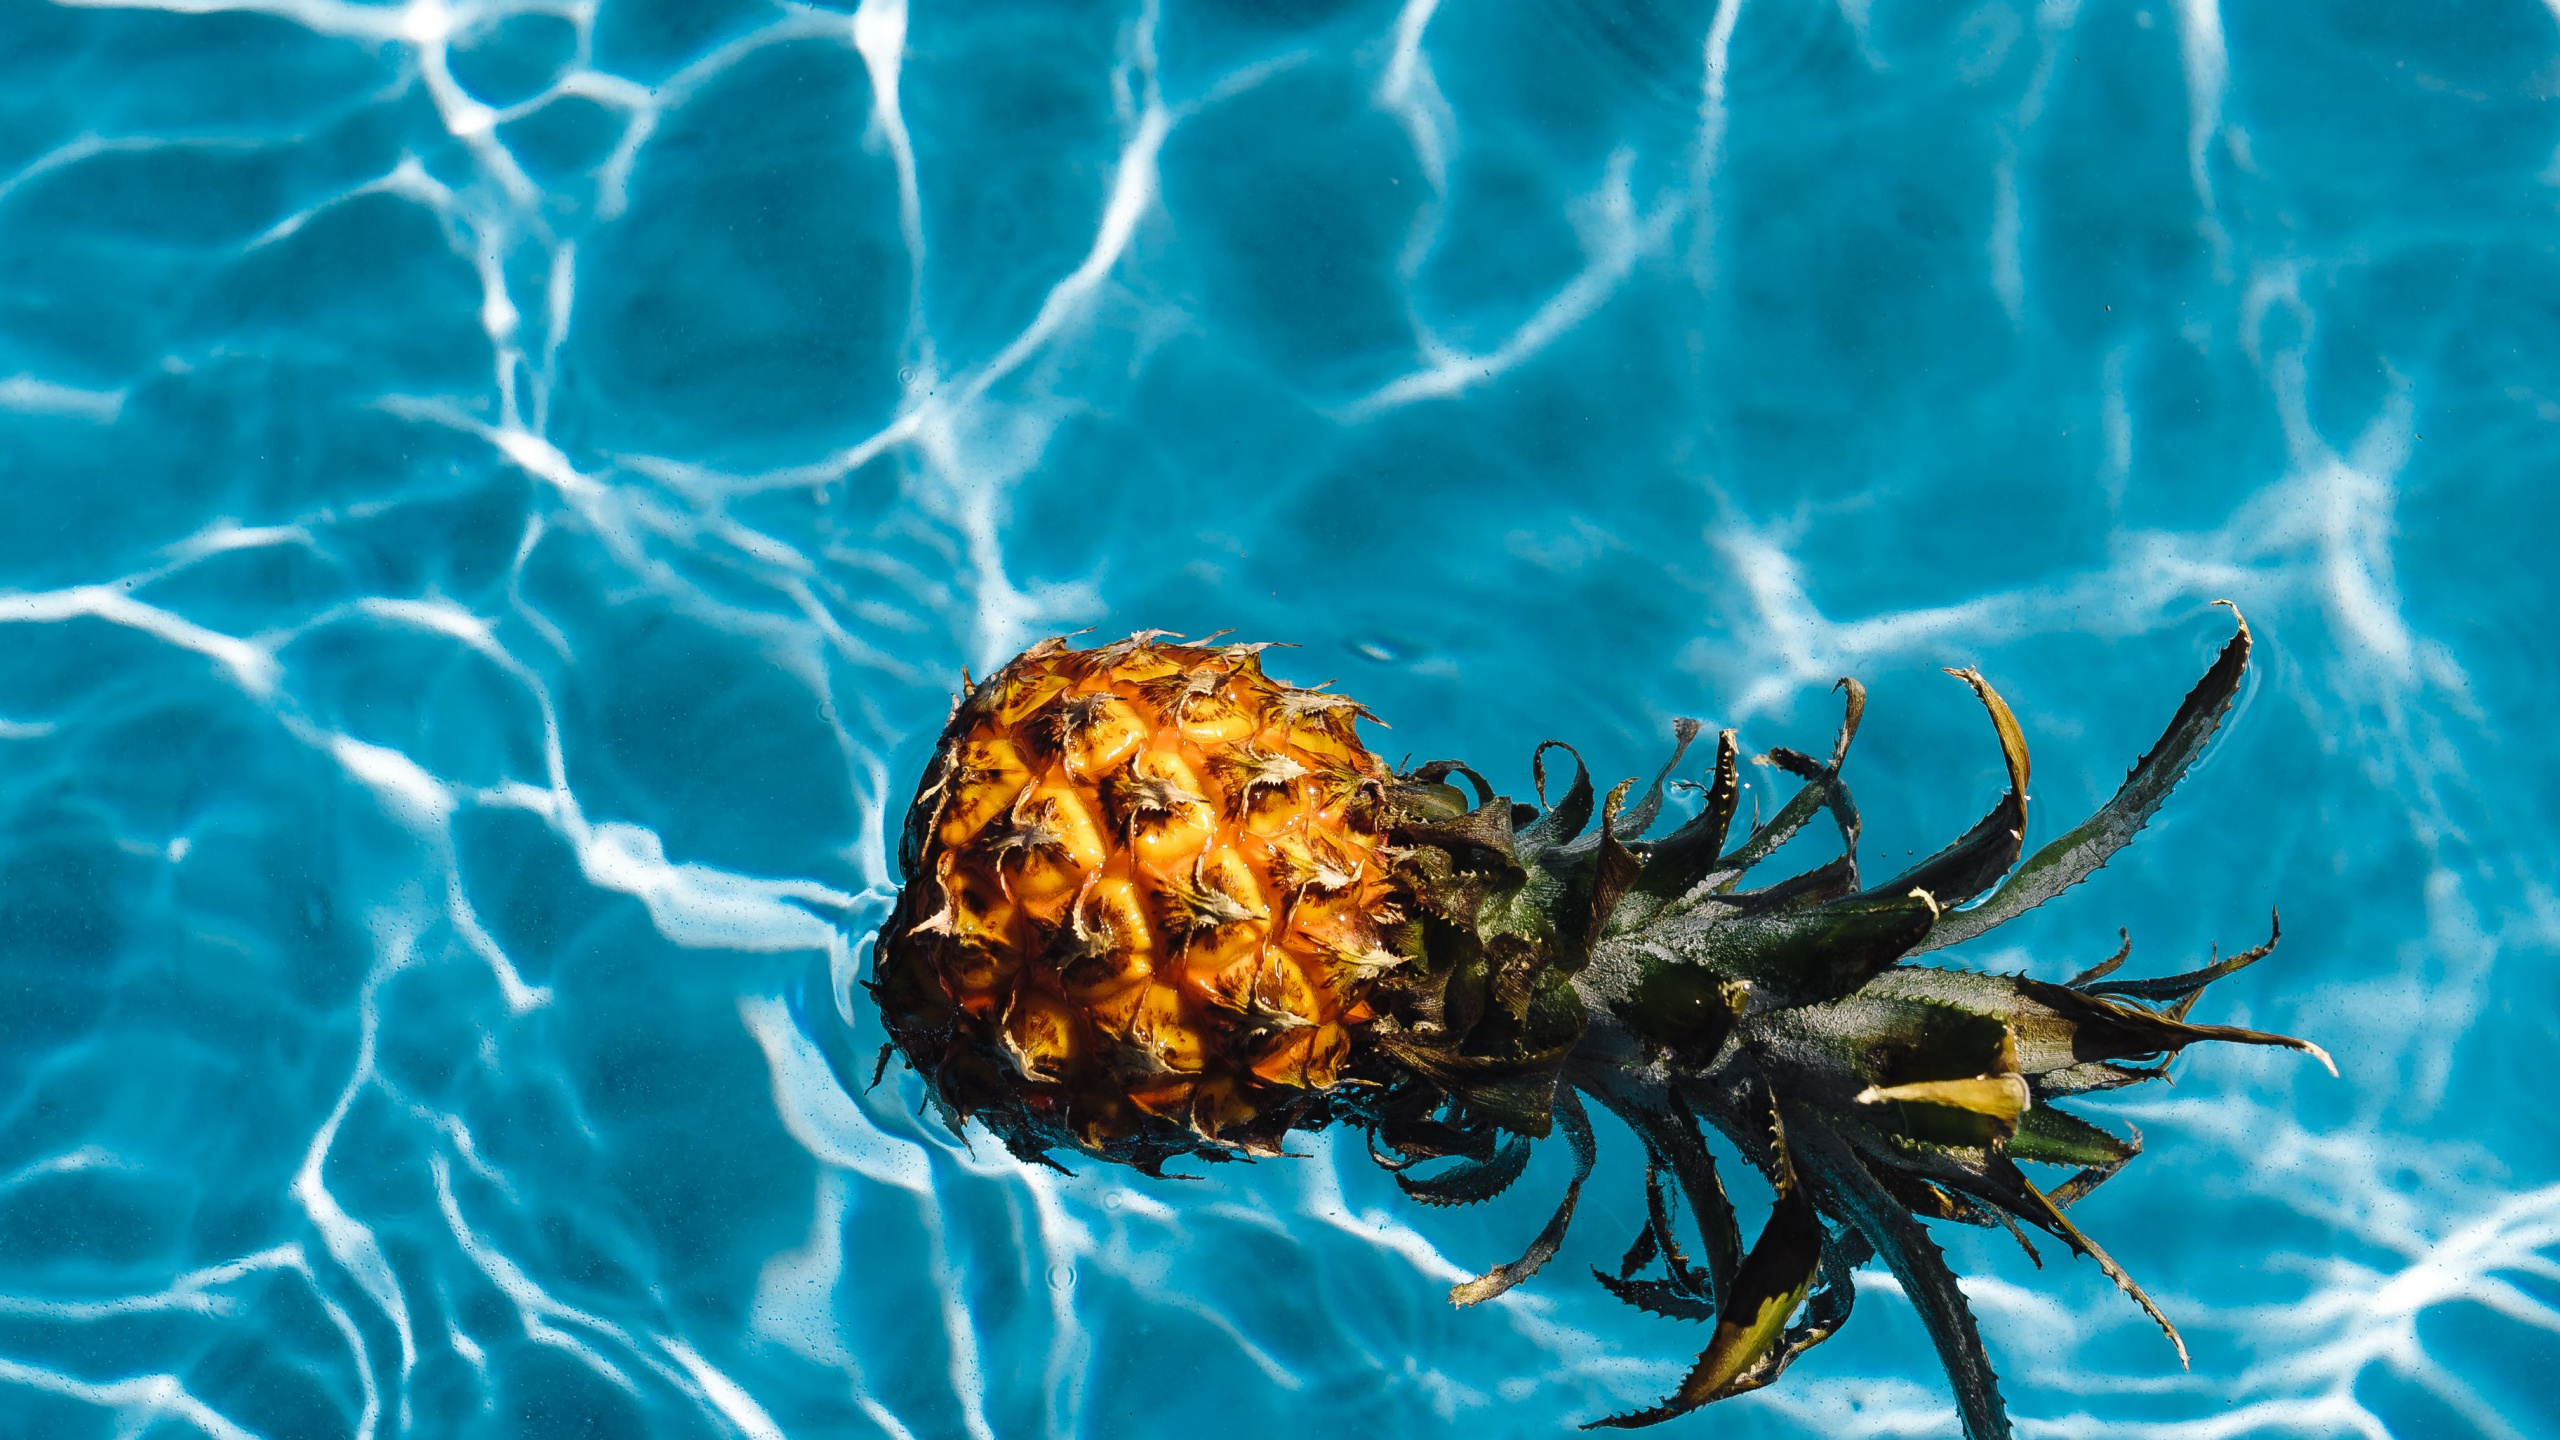 Brown and Green Pineapple Floating on Water. Wallpaper in 2560x1440 Resolution